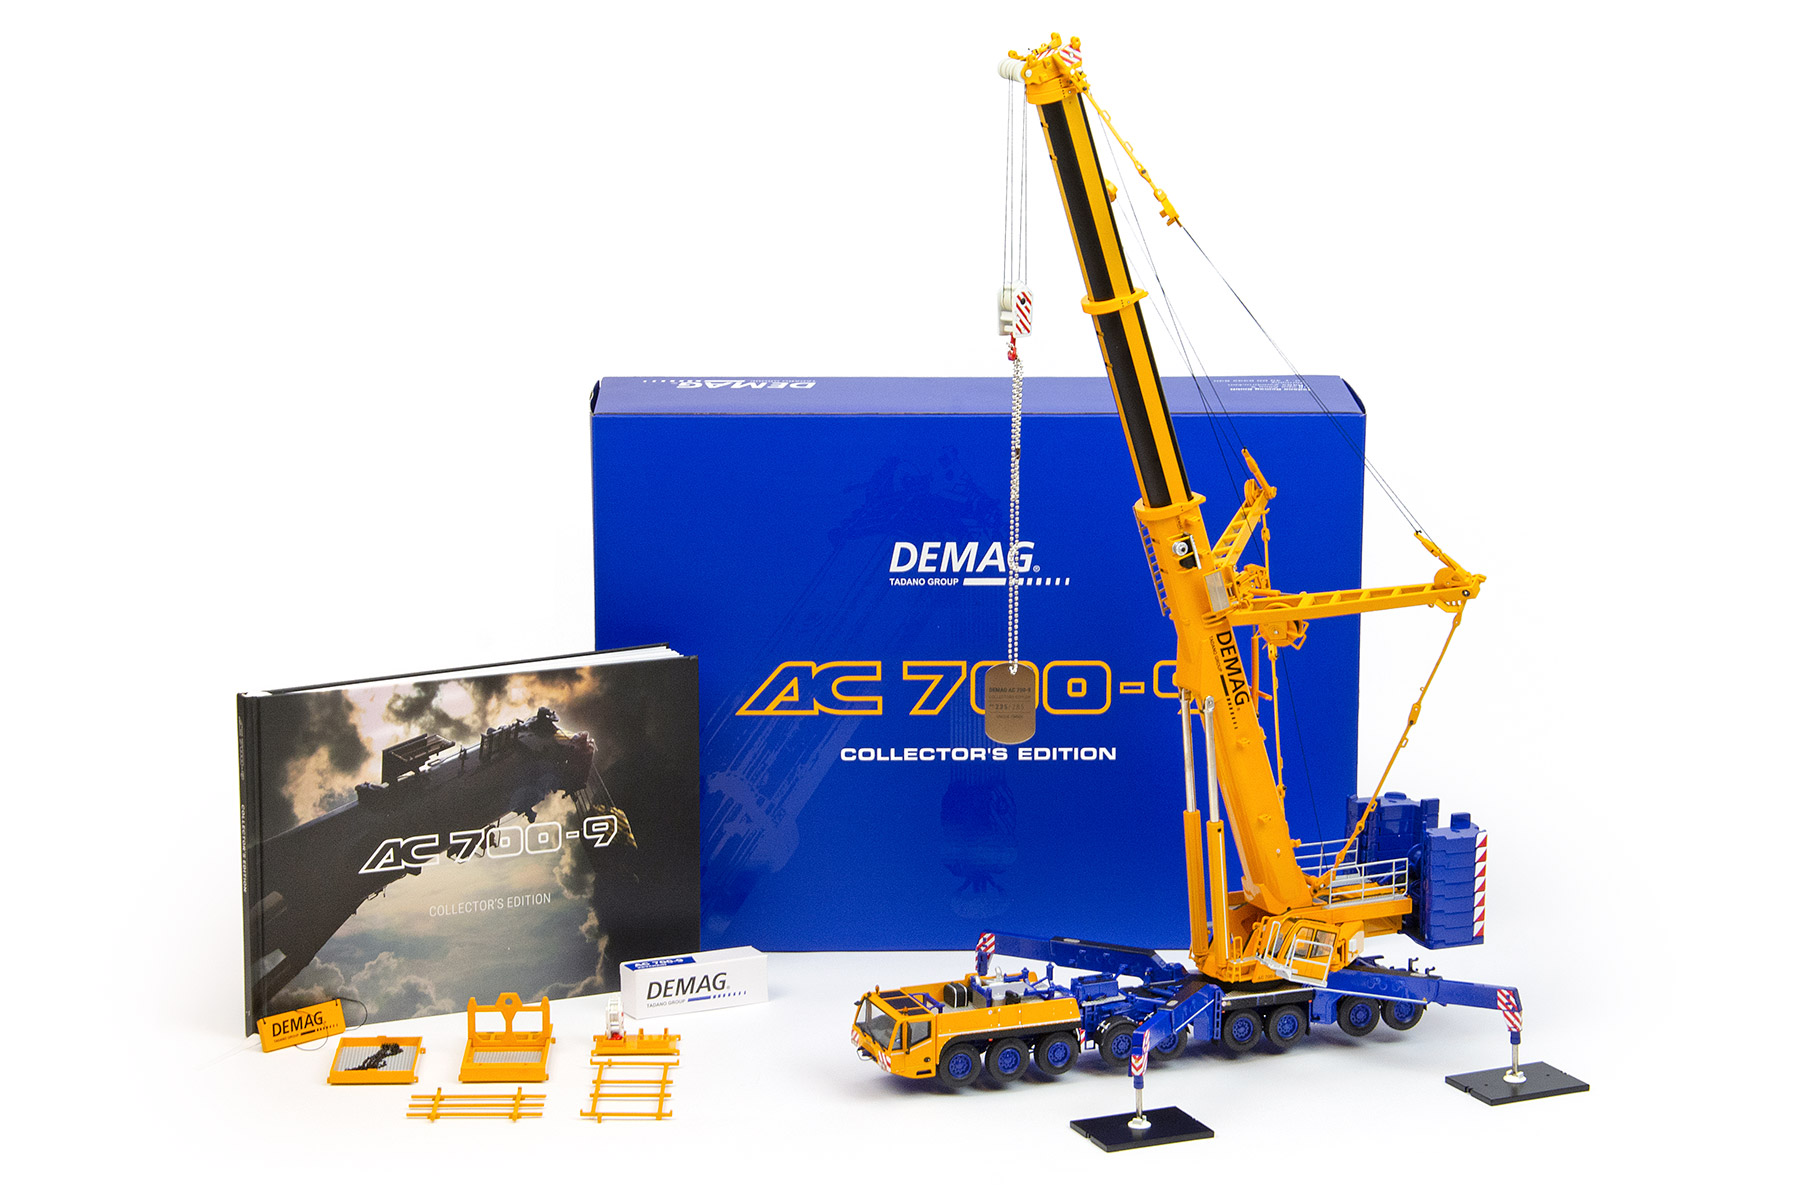 Demag Ac 700 9 Collector S Edition Model Of The Year Imc Models